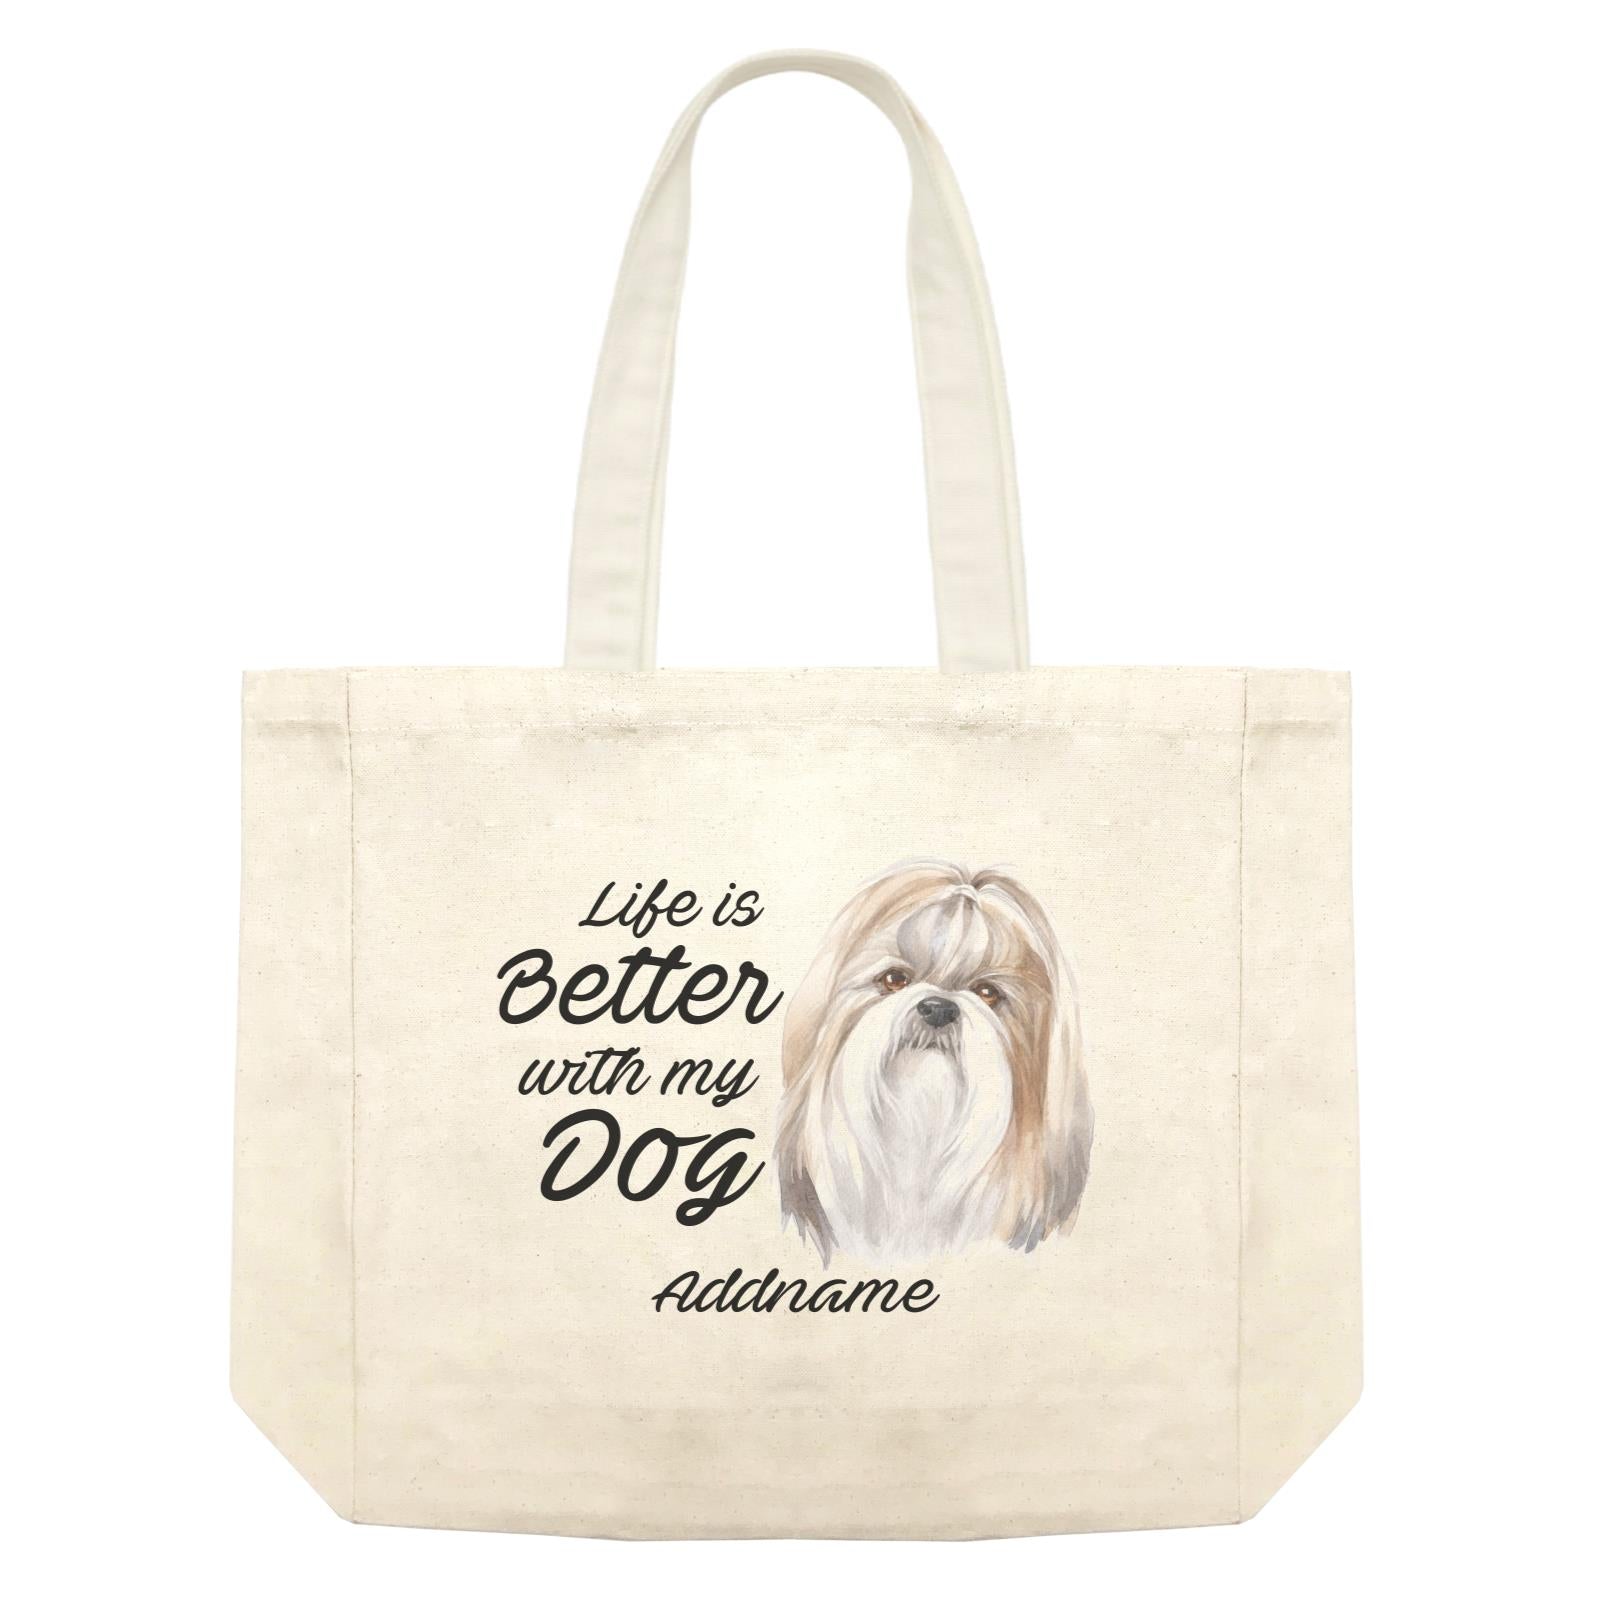 Watercolor Life is Better With My Dog Shih Tzu Addname Shopping Bag